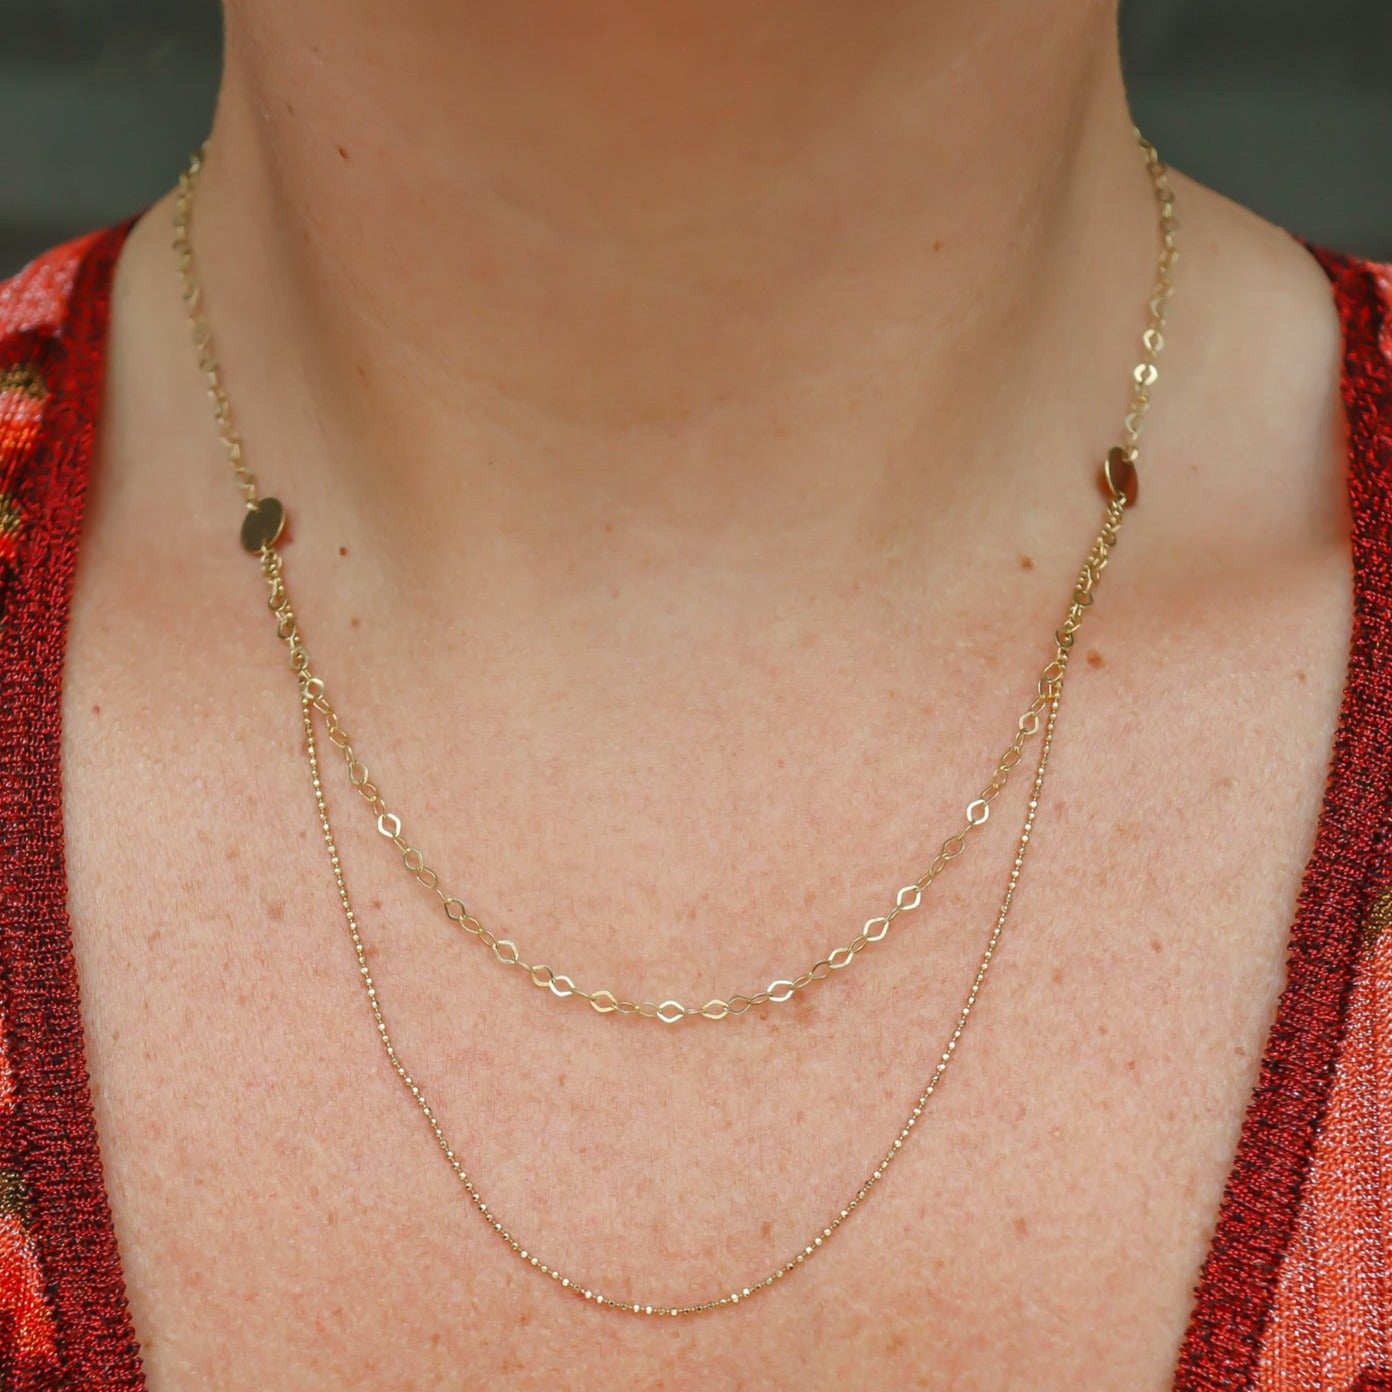 Double Chain Necklace